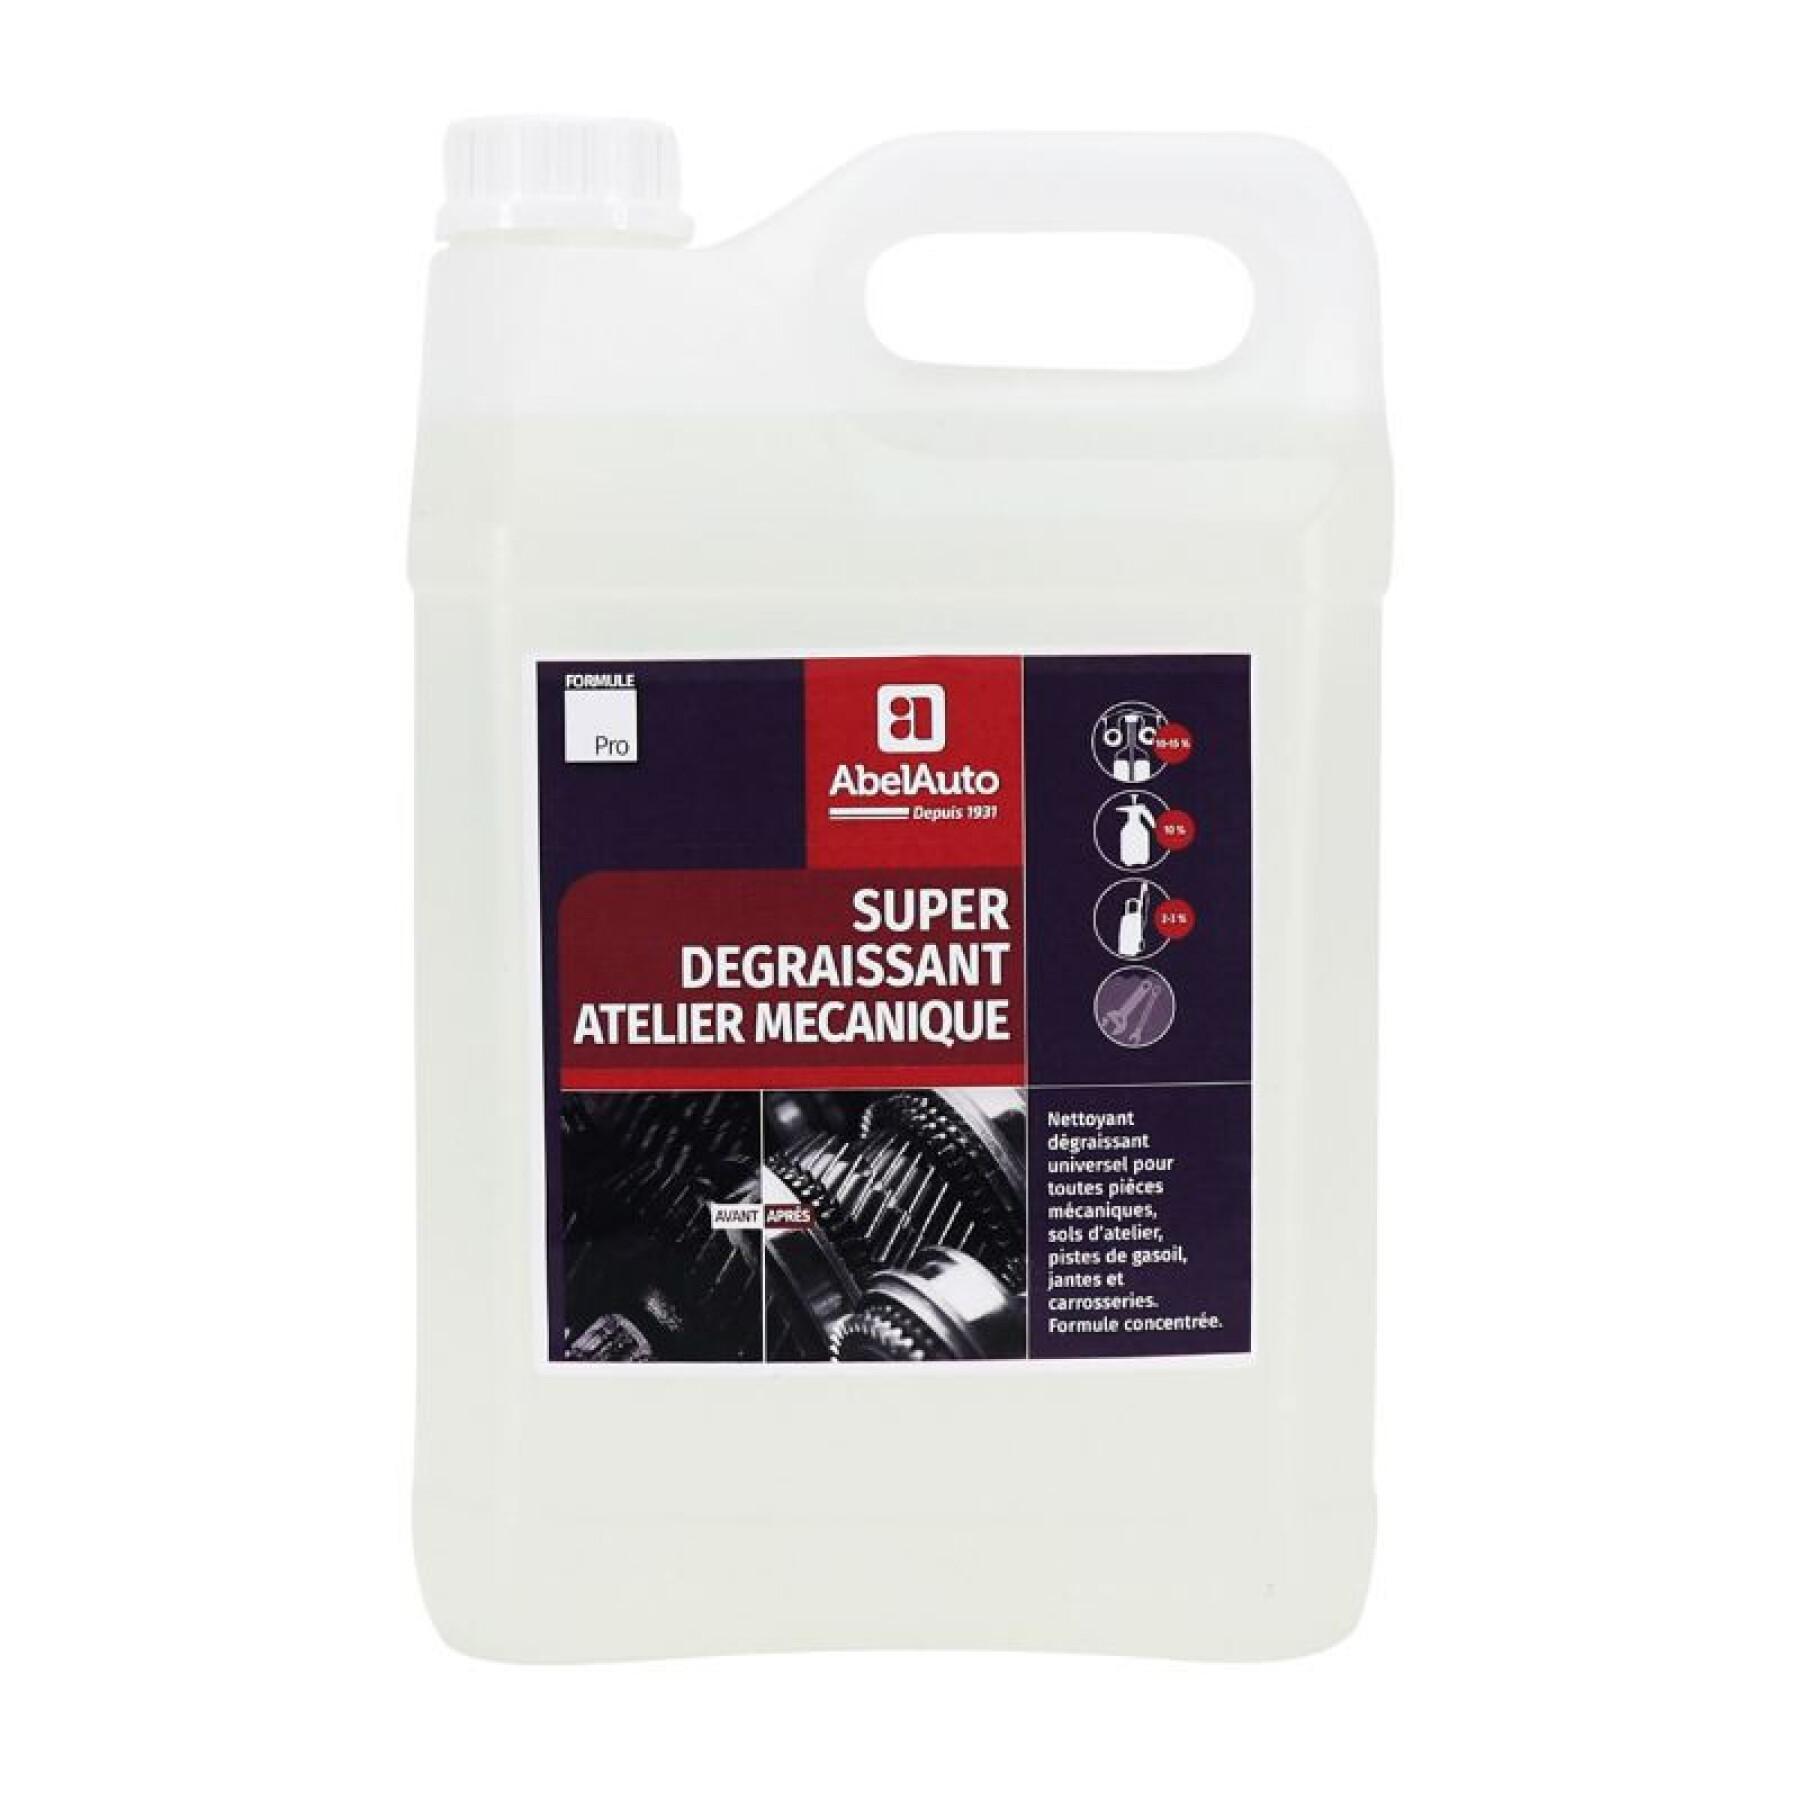 Super degreaser motorcycle cleaner for mechanical parts and bodywork Abel Auto